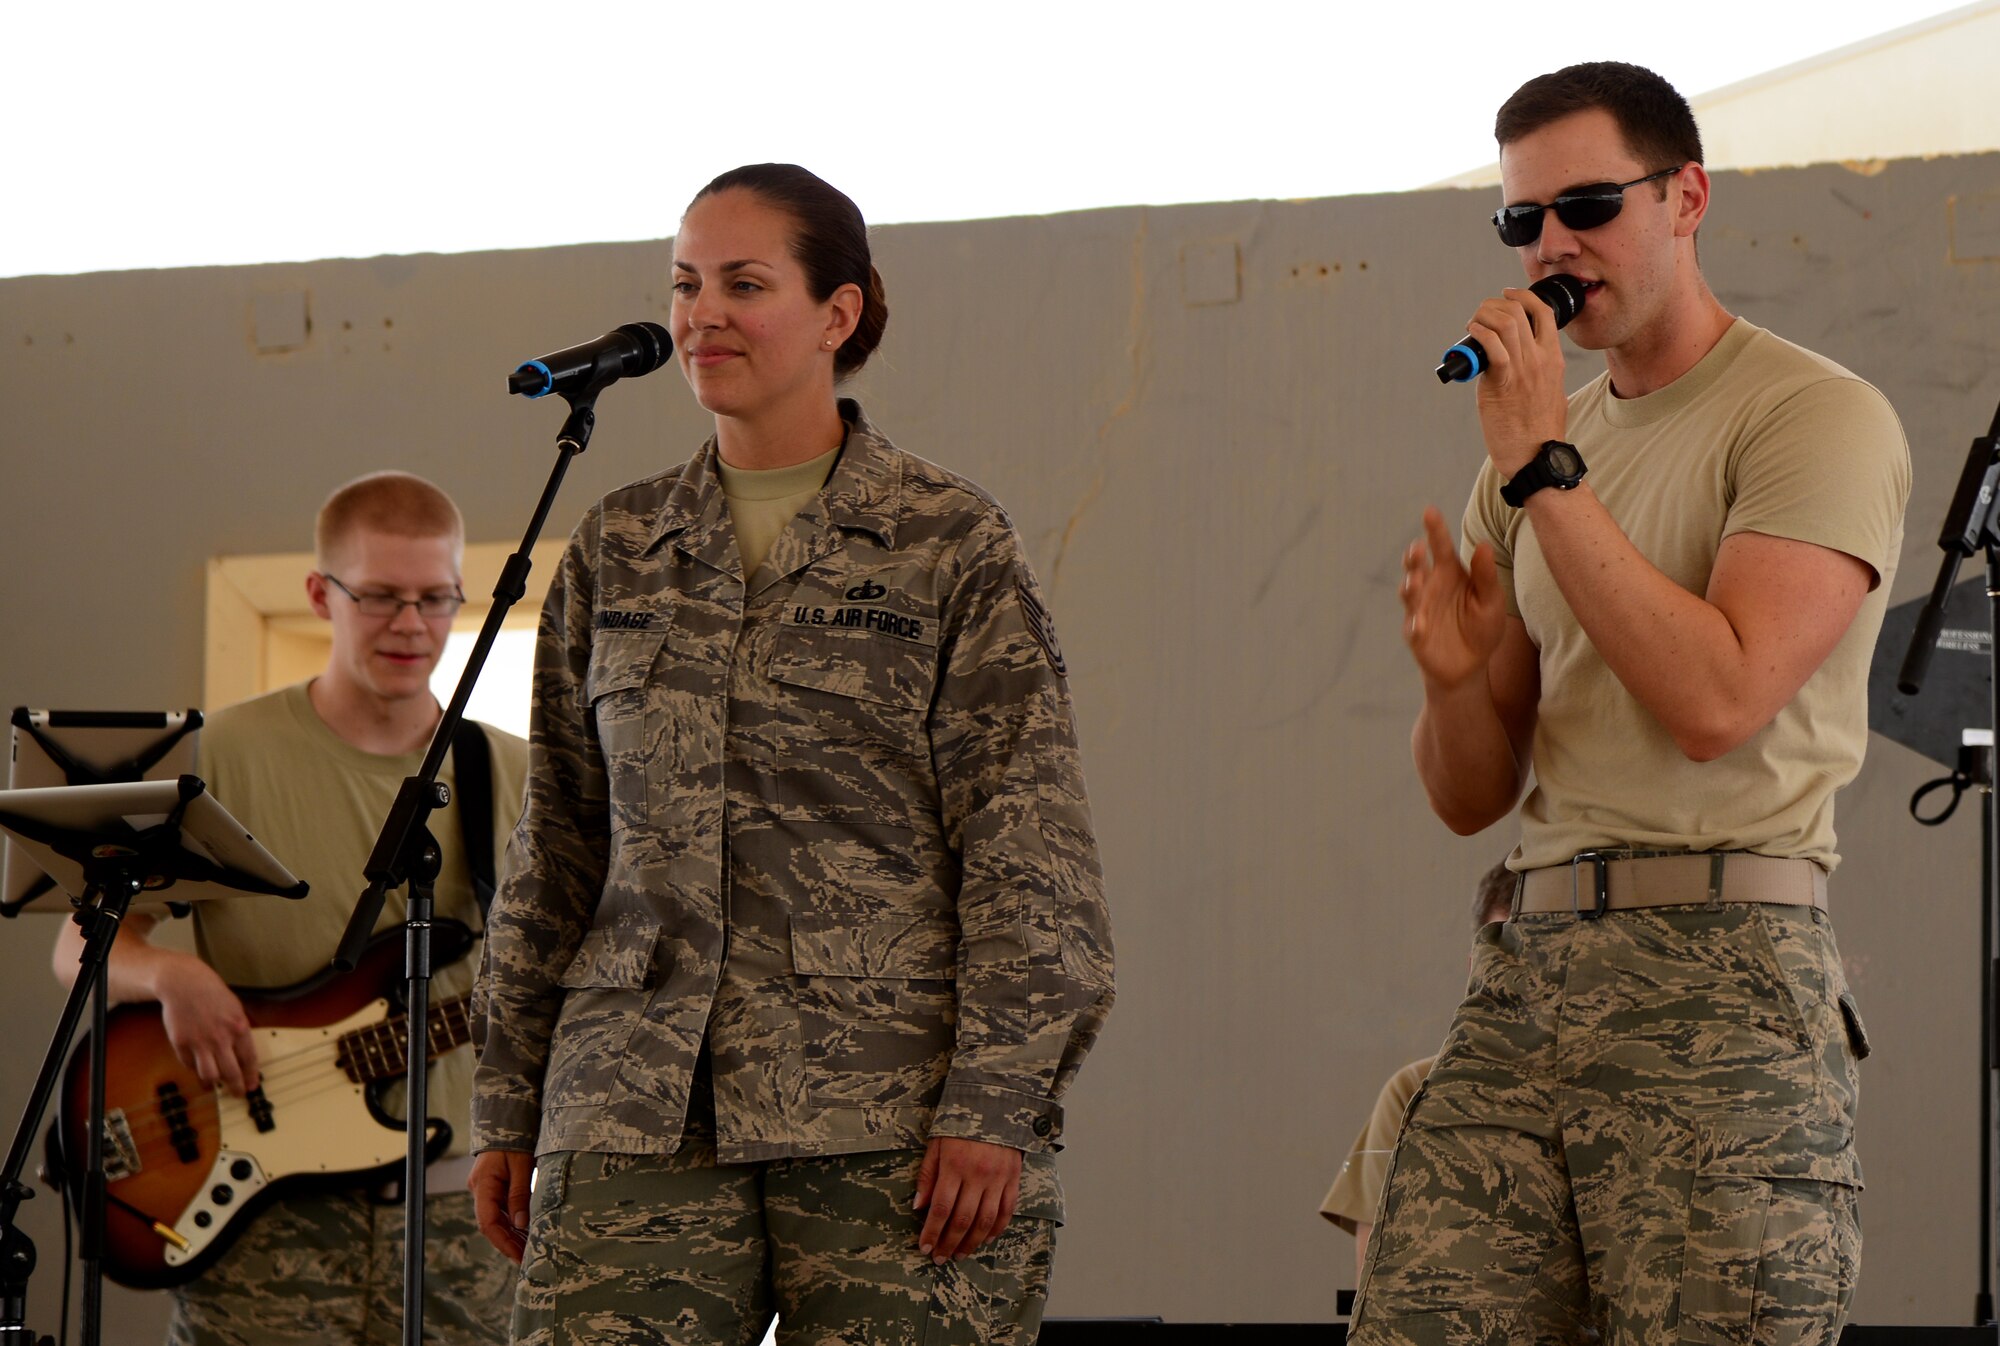 U.S. Air Force Airmen from the Air Force’s Central Band perform during the 379th Air Expeditionary Wing’s Never Quit event, April 4, 2015, at Al Udeid Air Base, Qatar. The event was coordinated by the 379th Expeditionary Force Support Squadron with informational booths provided by the 379th Expeditionary Medical Group, 379th Expeditionary Civil Engineer Squadron, and 379th AEW chapel services team. The purpose of the event was to encourage healthy and positive life choices. (U.S. Air Force photo by Senior Airman Kia Atkins)